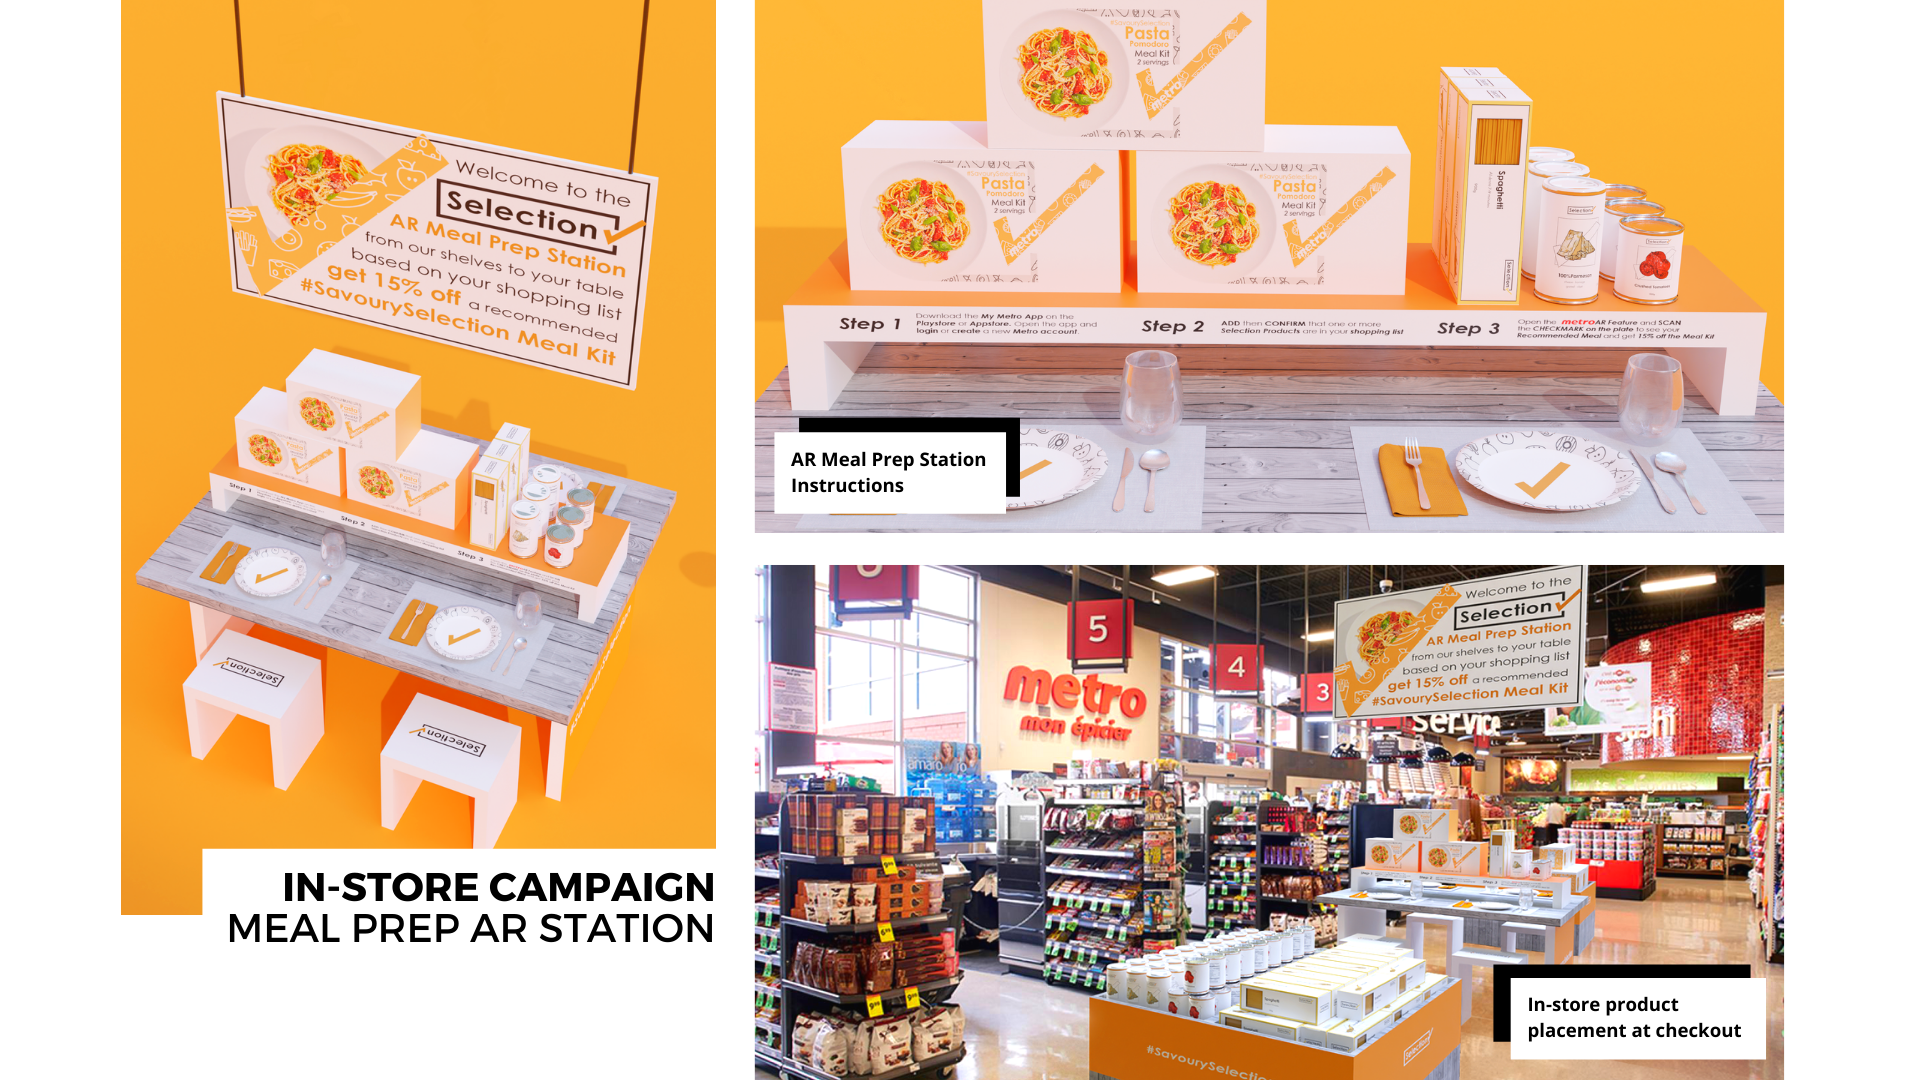 "Taste our Selection": Metro's Selection Private Label Rebrand and Launch Campaign Concept